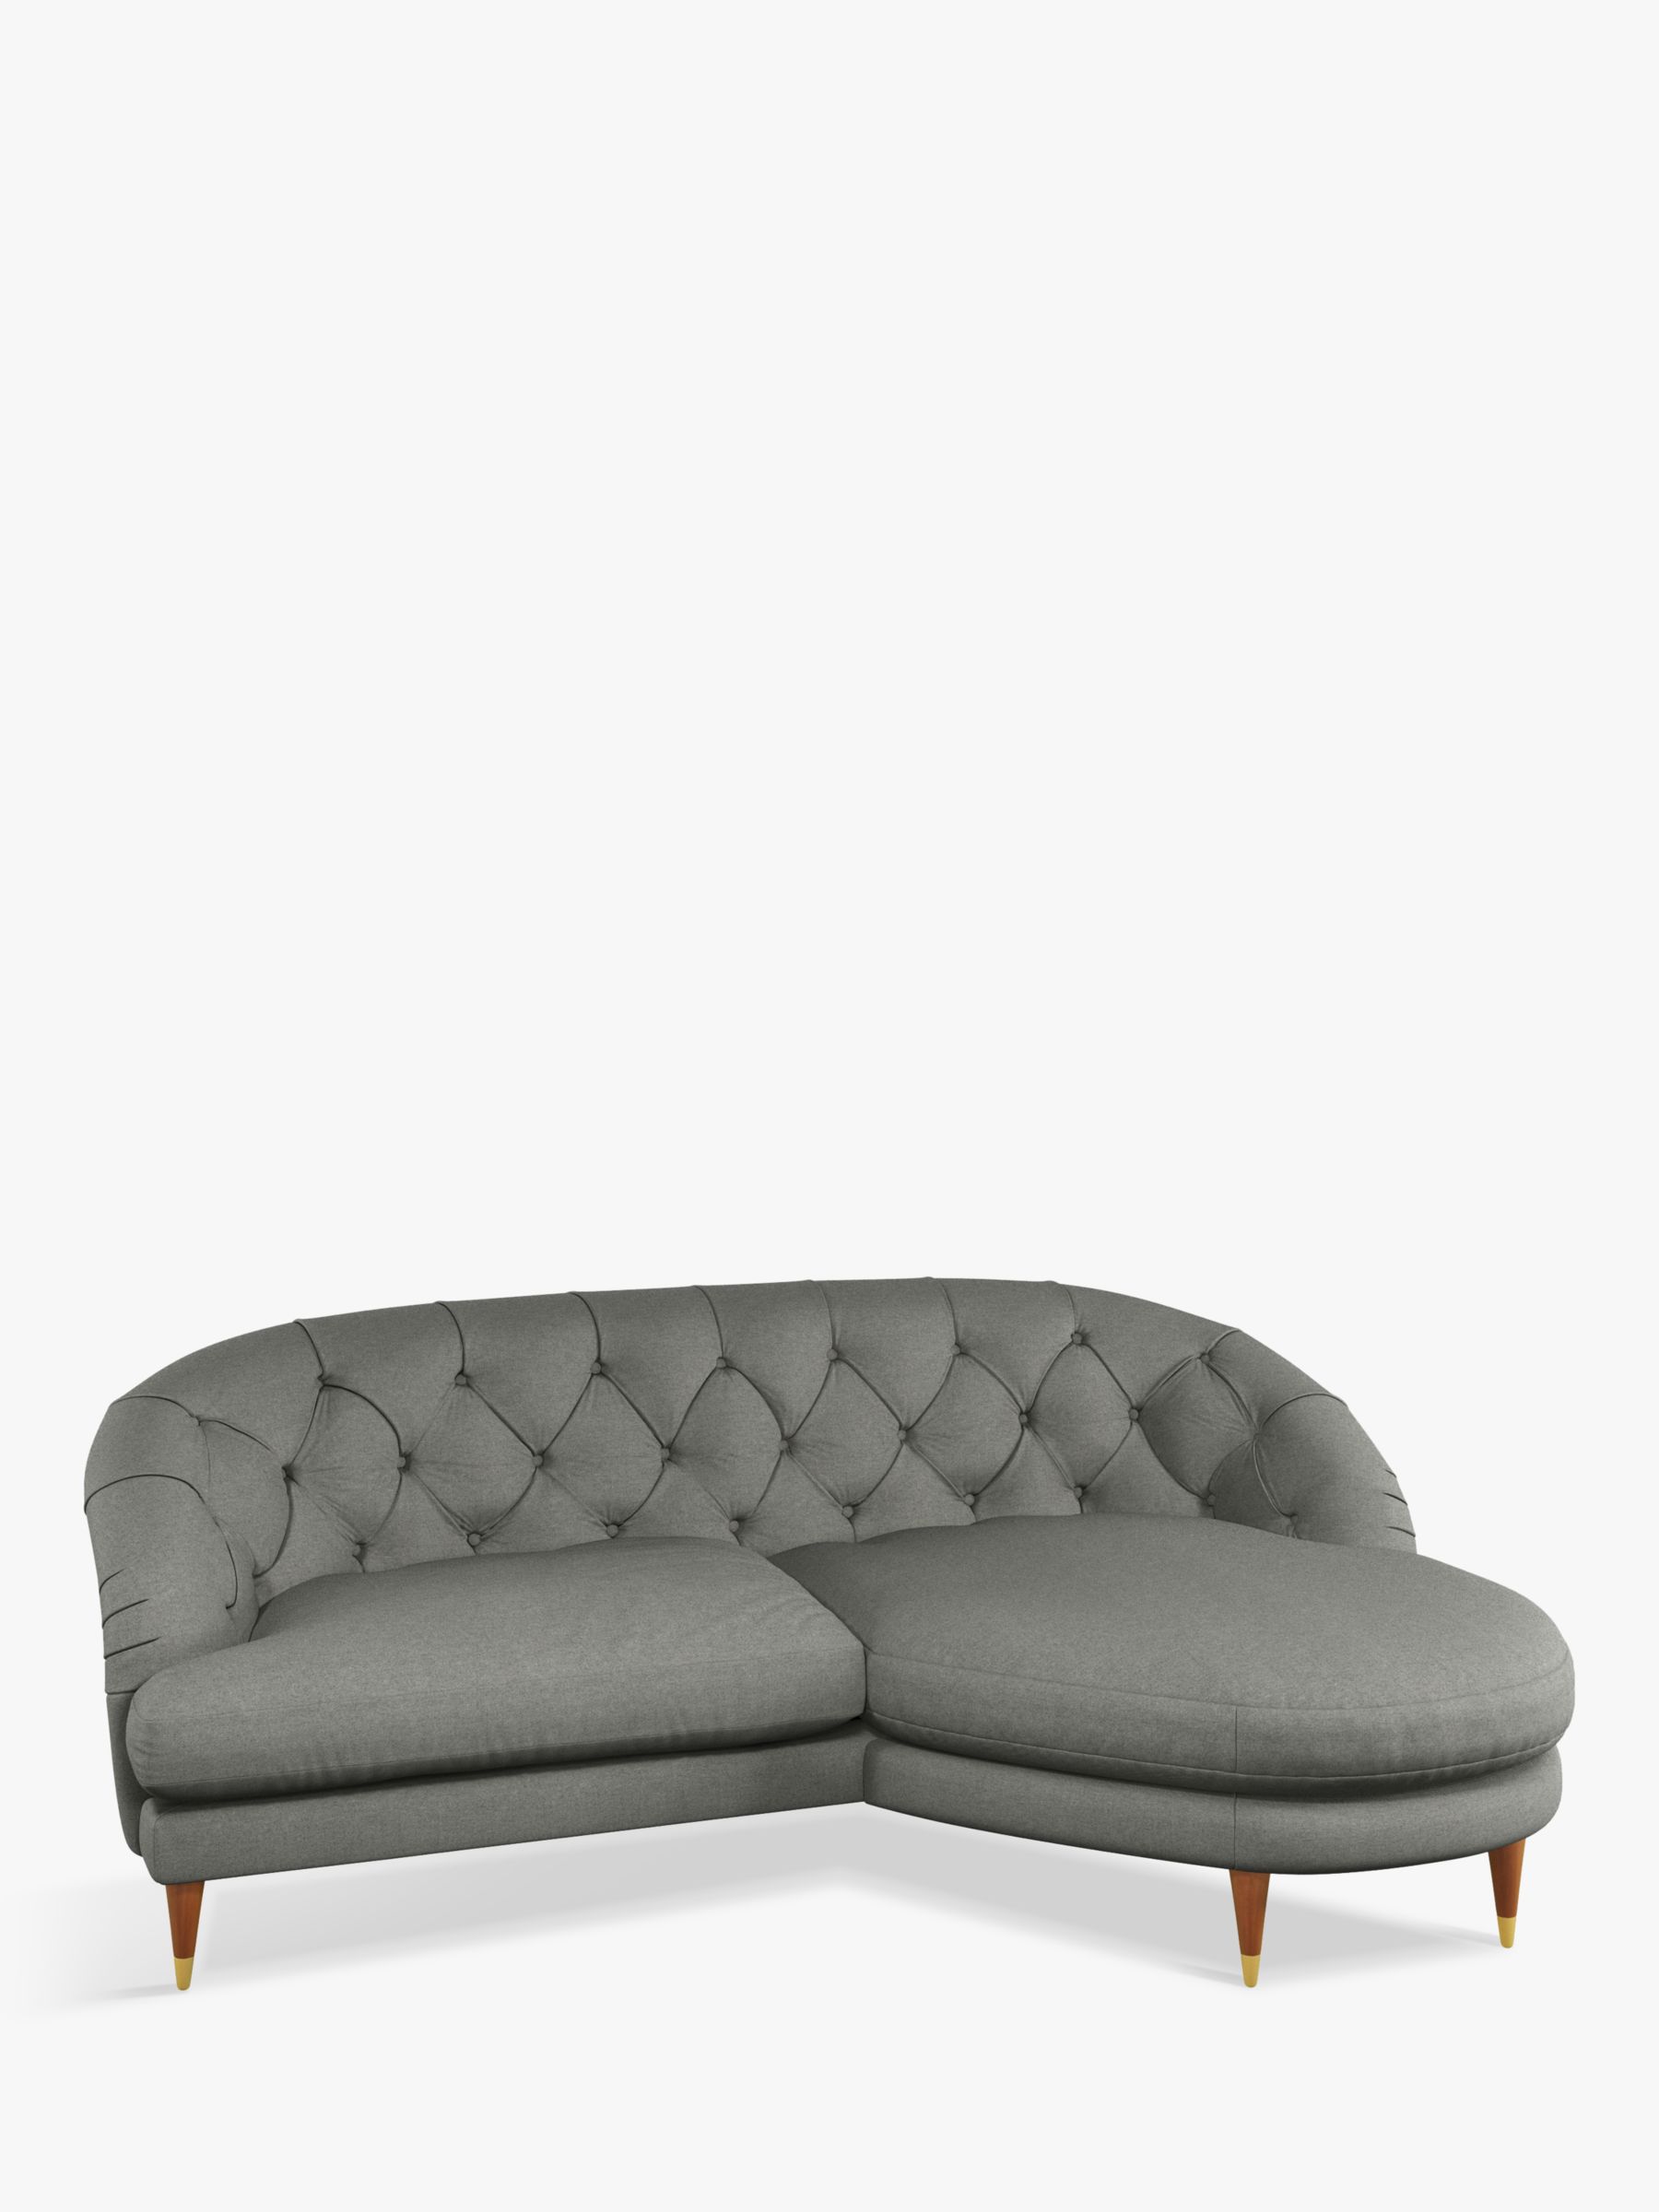 Photo of John lewis + swoon radley chaise end sofa